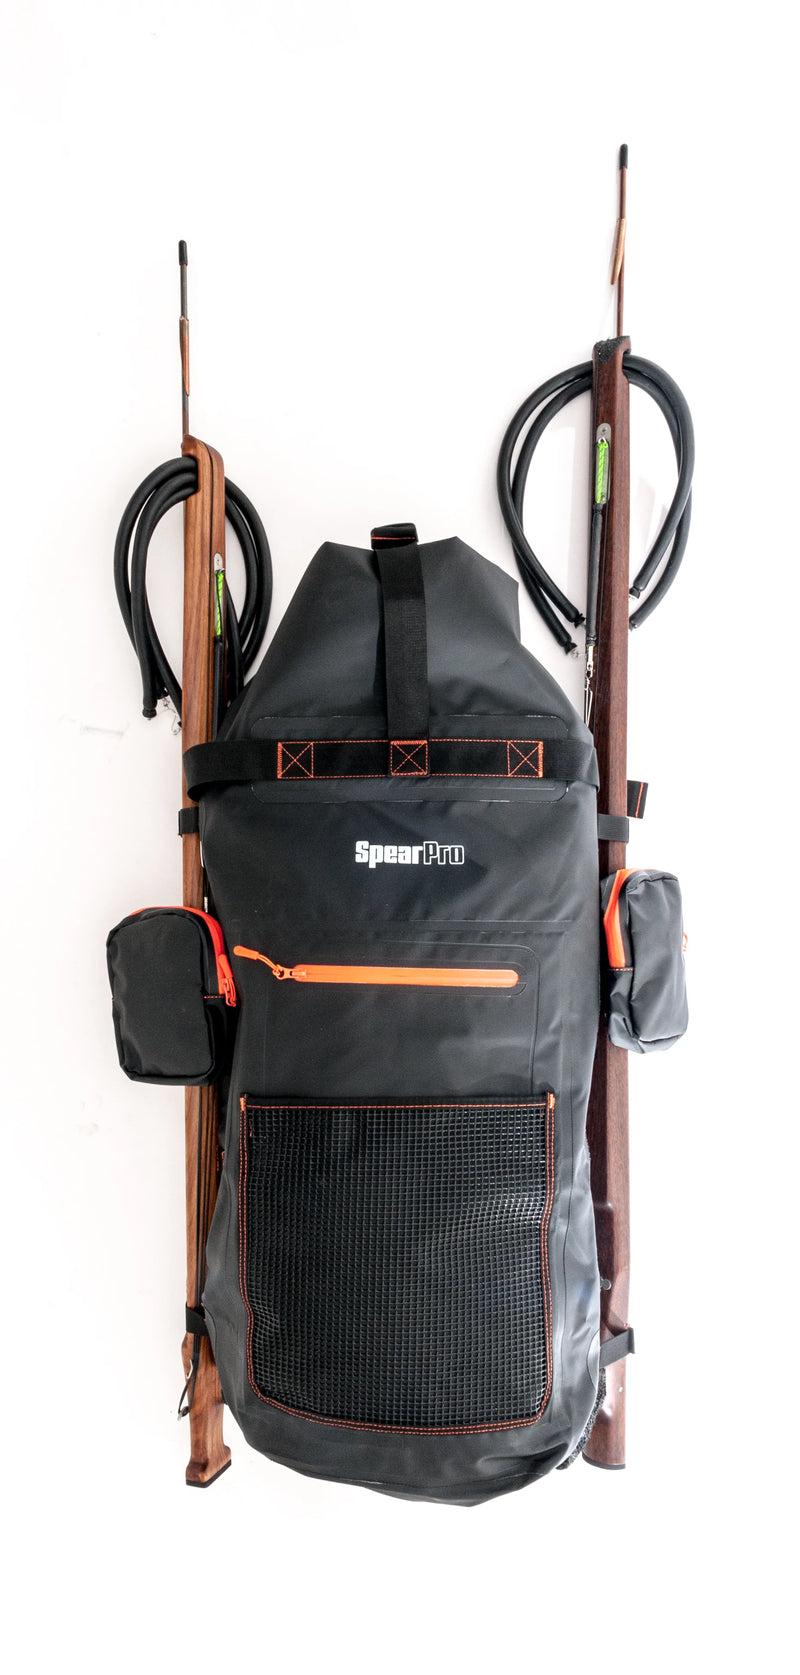 Spearfishing - Bags Tagged Bags - Spearfishing Experts